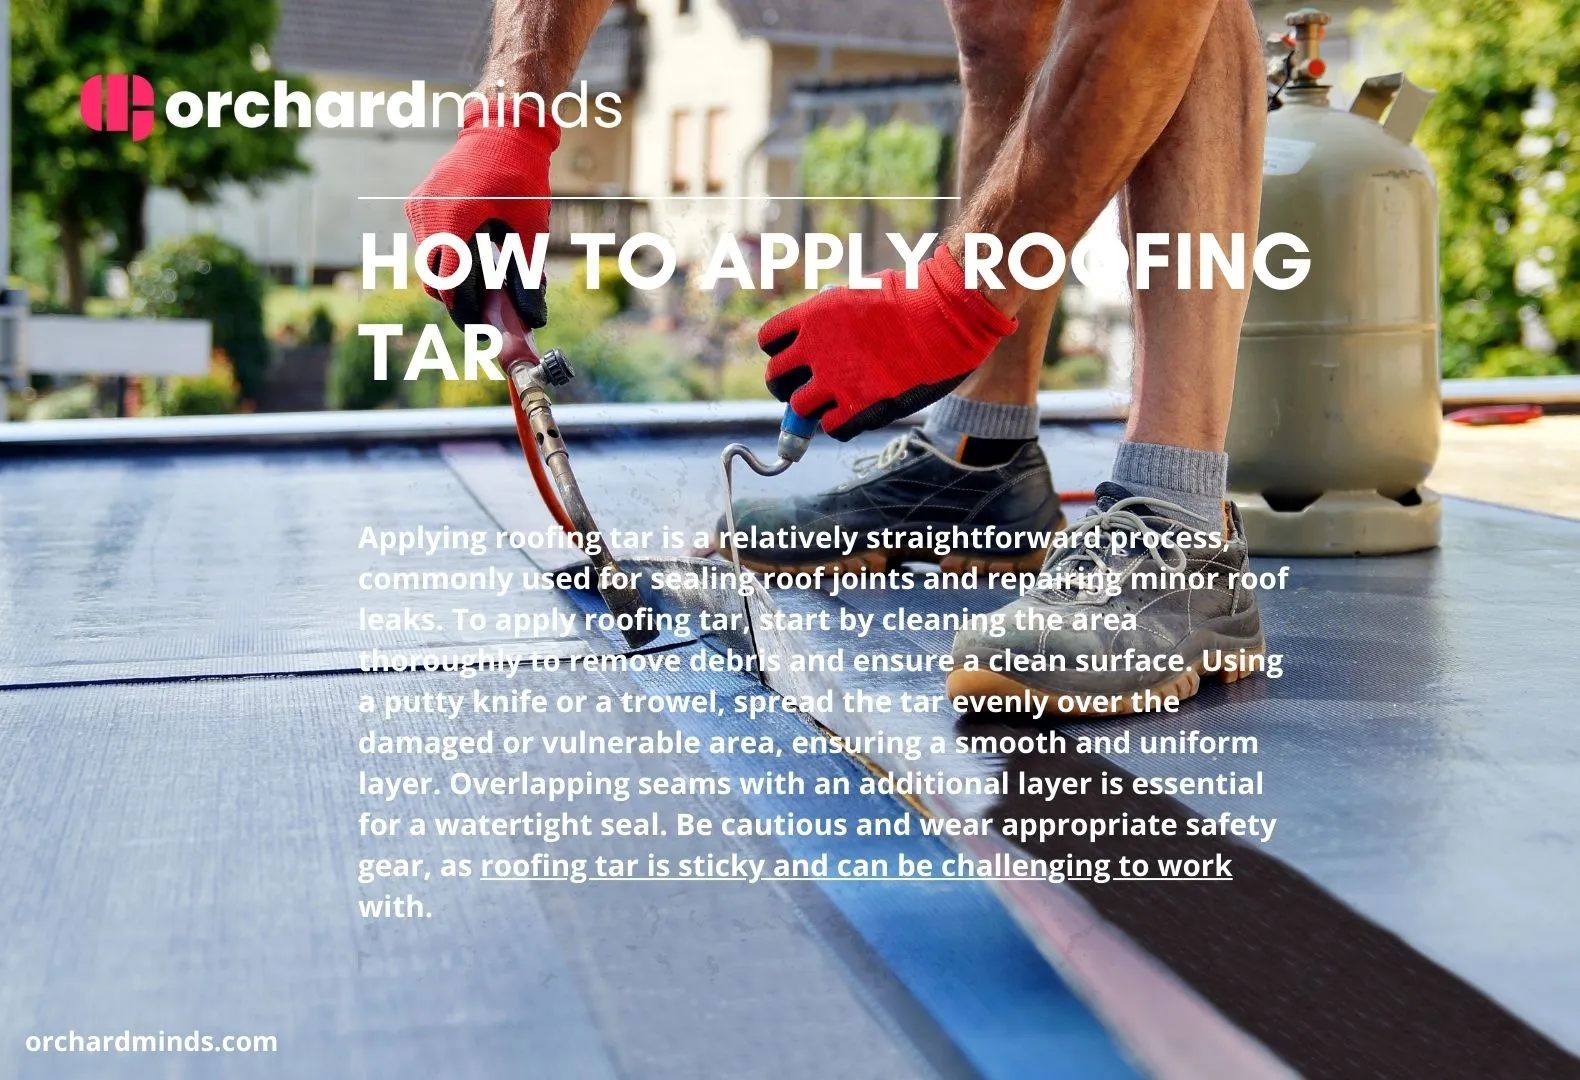 How to apply roofing tar